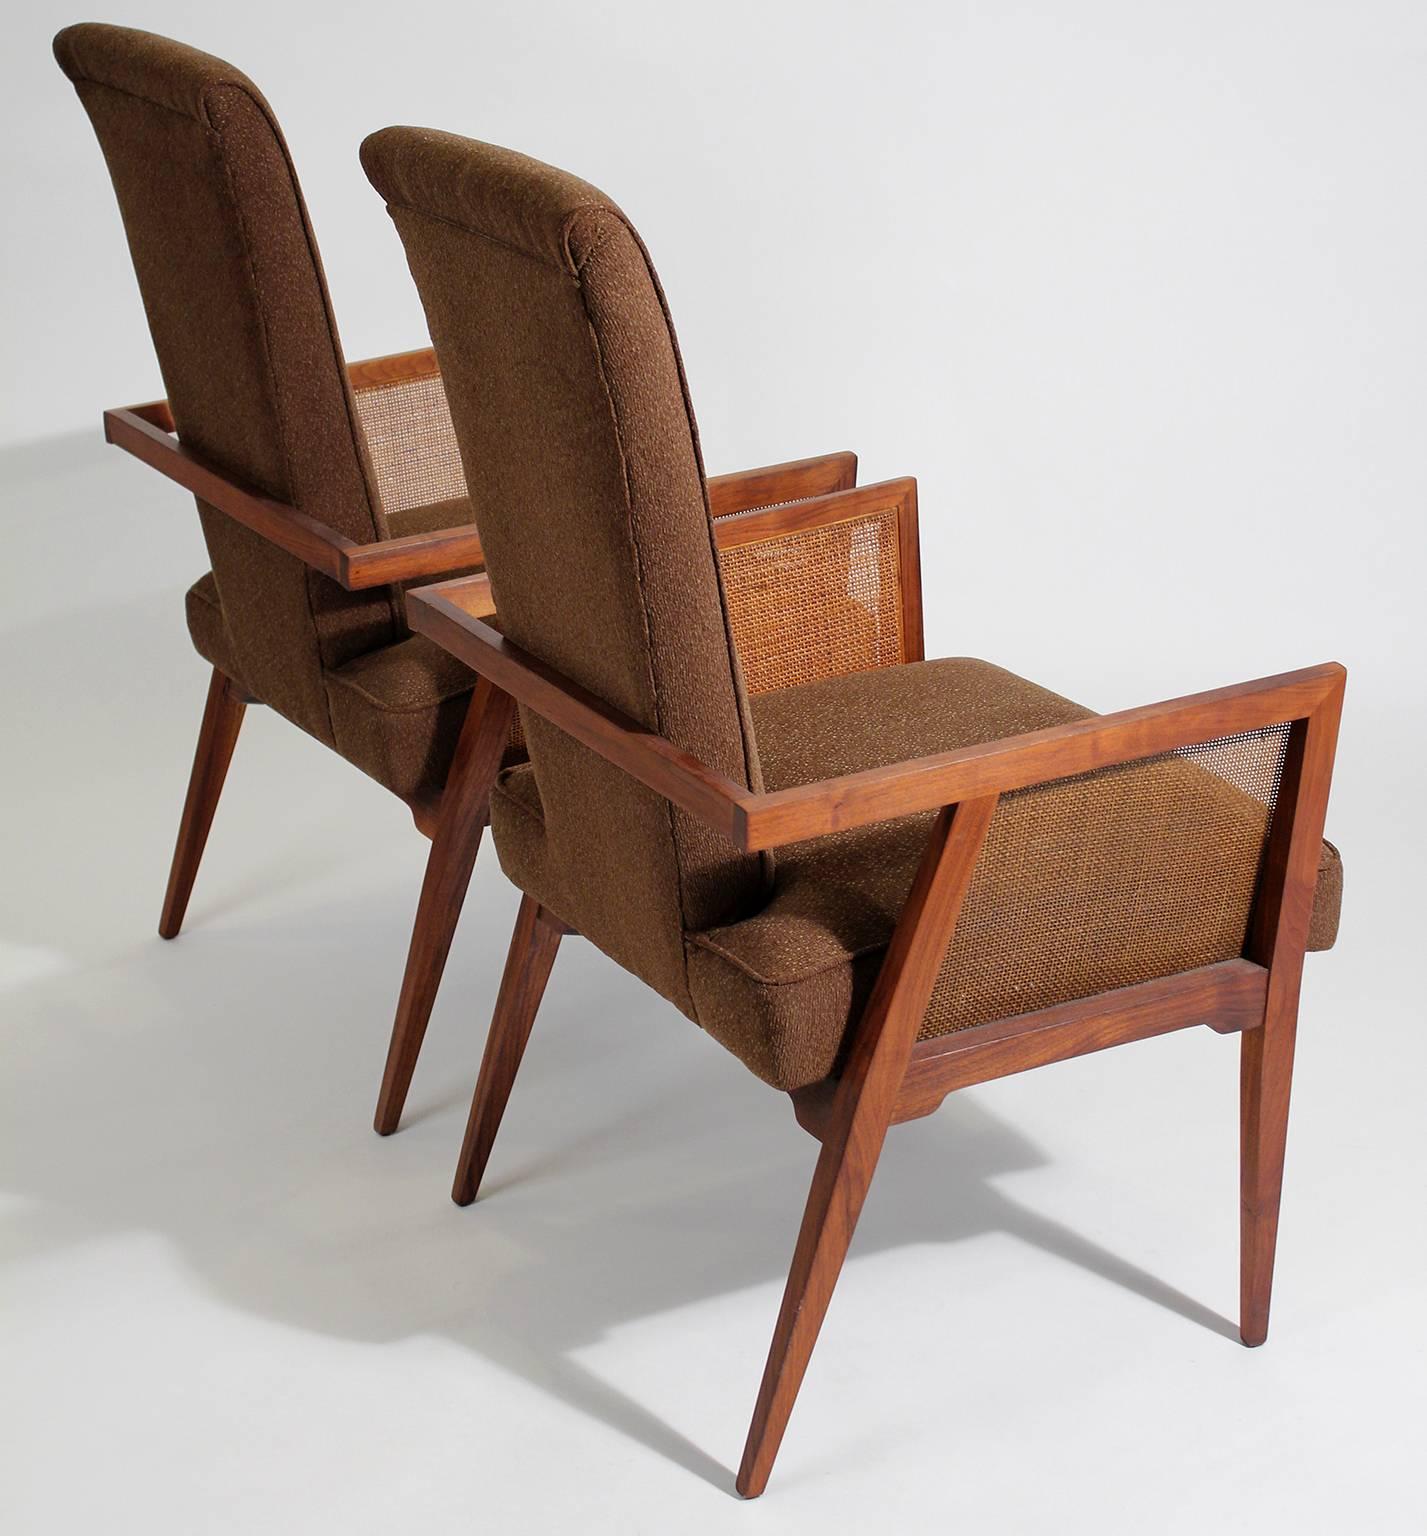 20th Century American Modernist Walnut and Cane Tall Back Sitting Desk Accent Armchairs